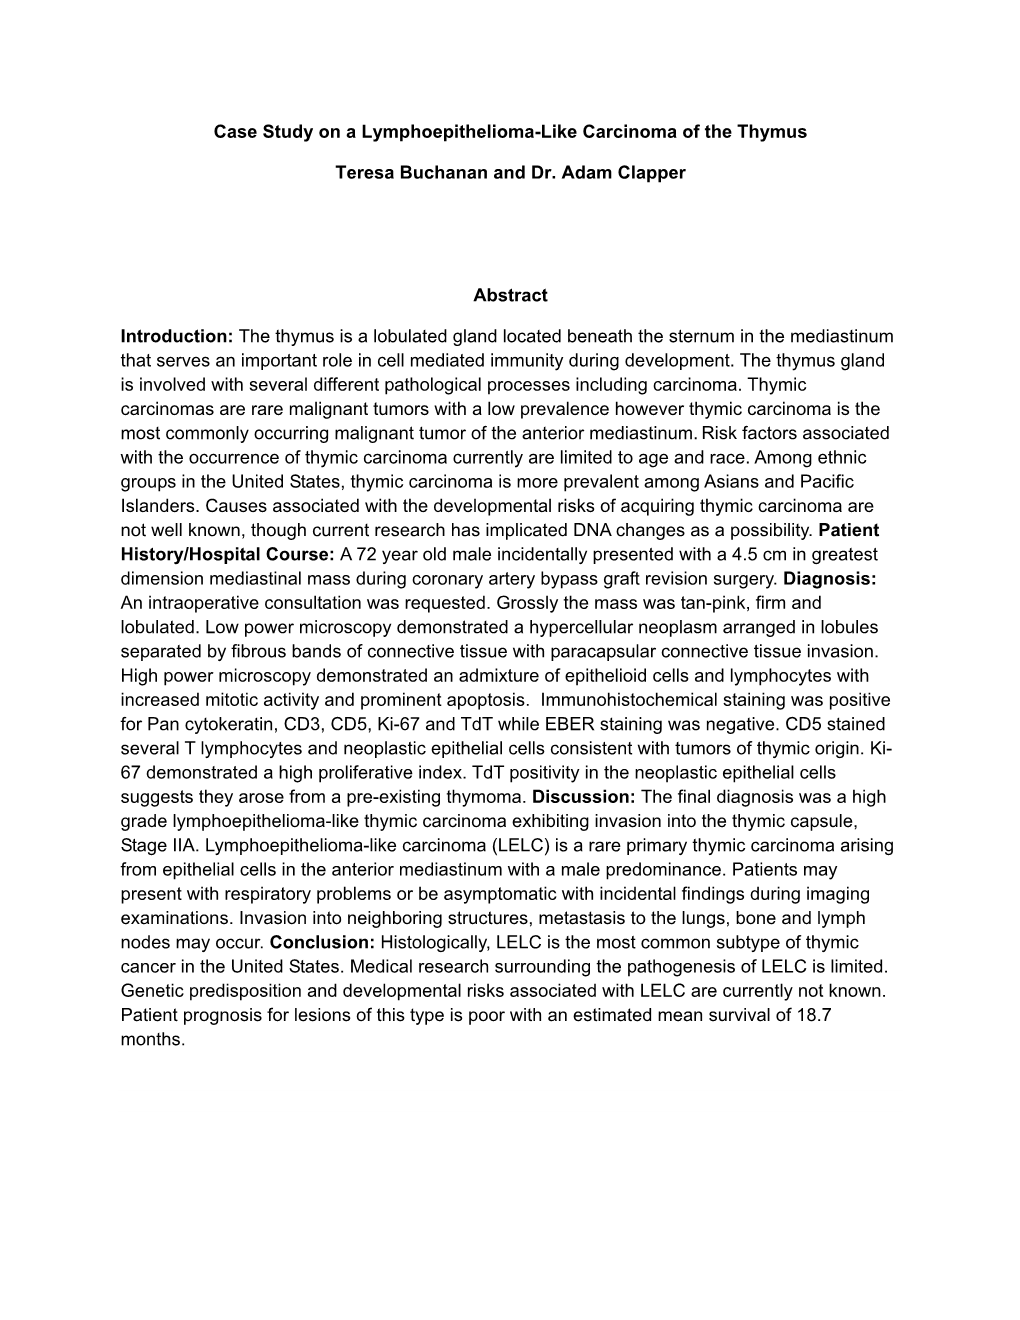 Case Study on a Lymphoepithelioma-Like Carcinoma of the Thymus Teresa Buchanan and Dr. Adam Clapper Abstract Introduction: the T